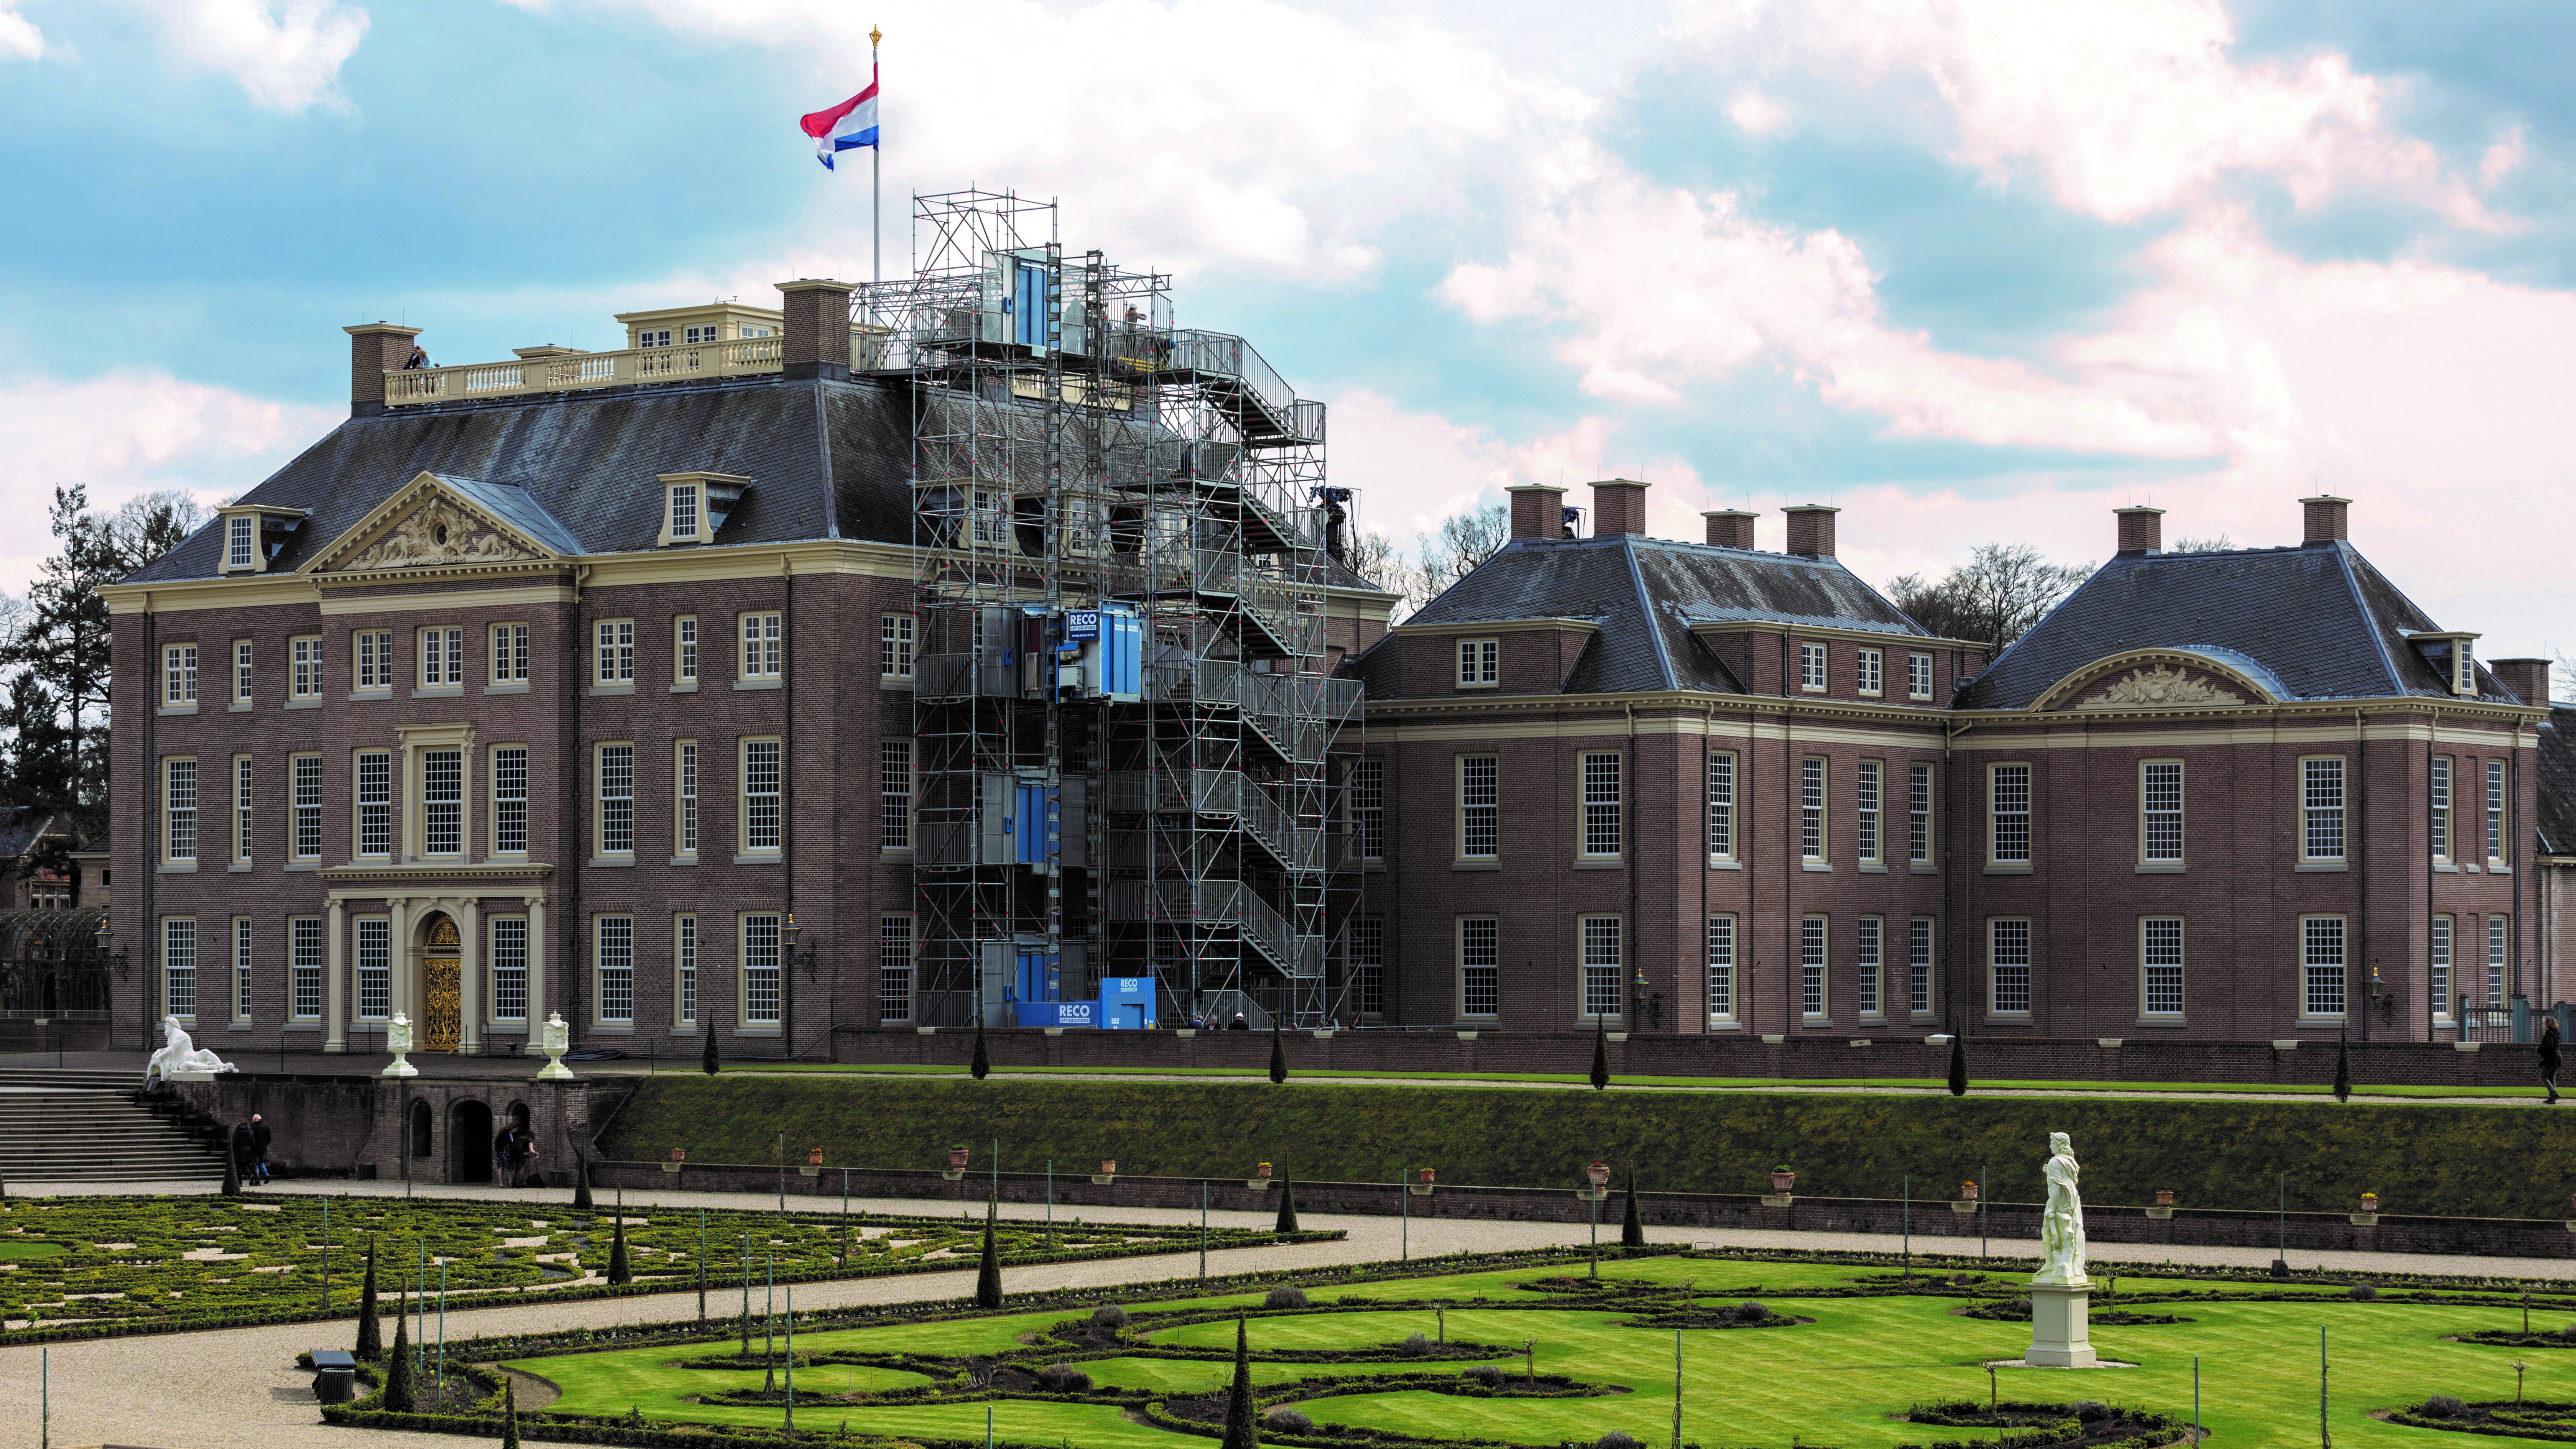 RECO provided passenger lifts for the Dutch Het Loo Palace for visitors to access the rooftop viewpoint